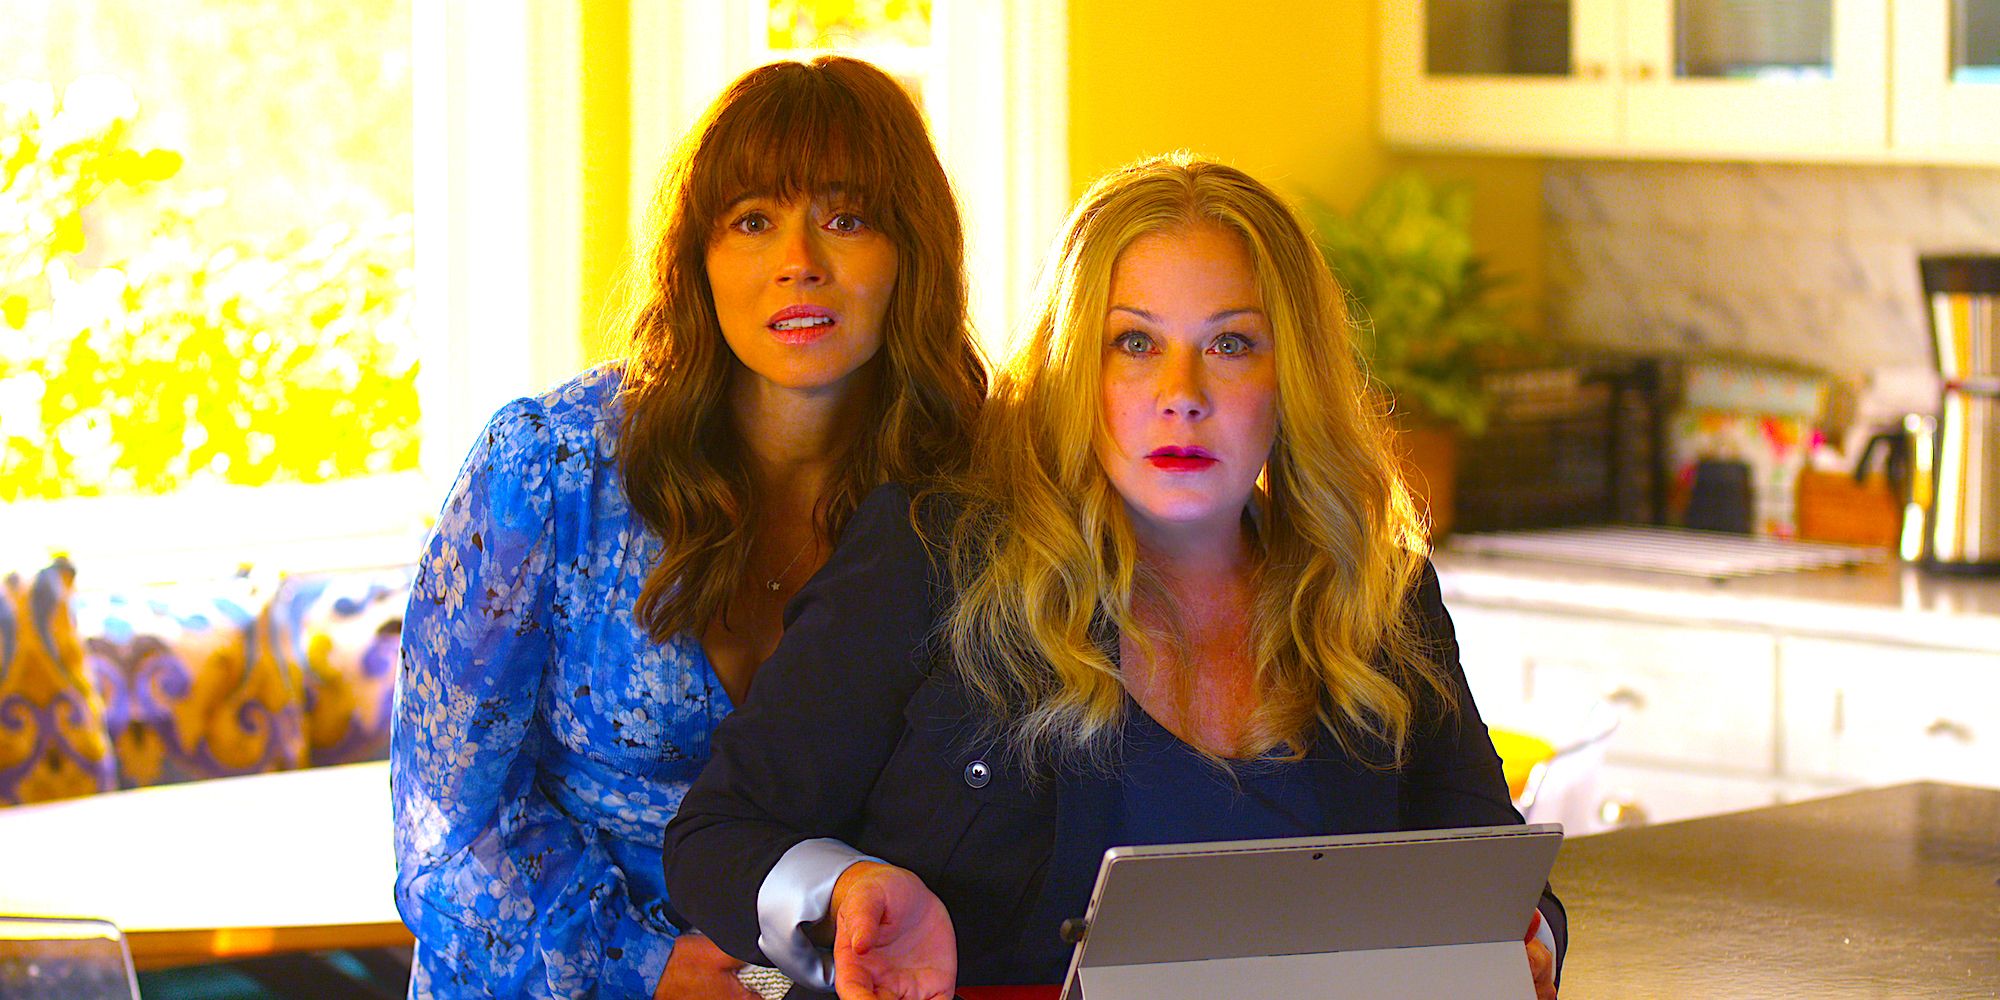 Linda Cardellini and Christina Applegate in the kitchen with the ipad